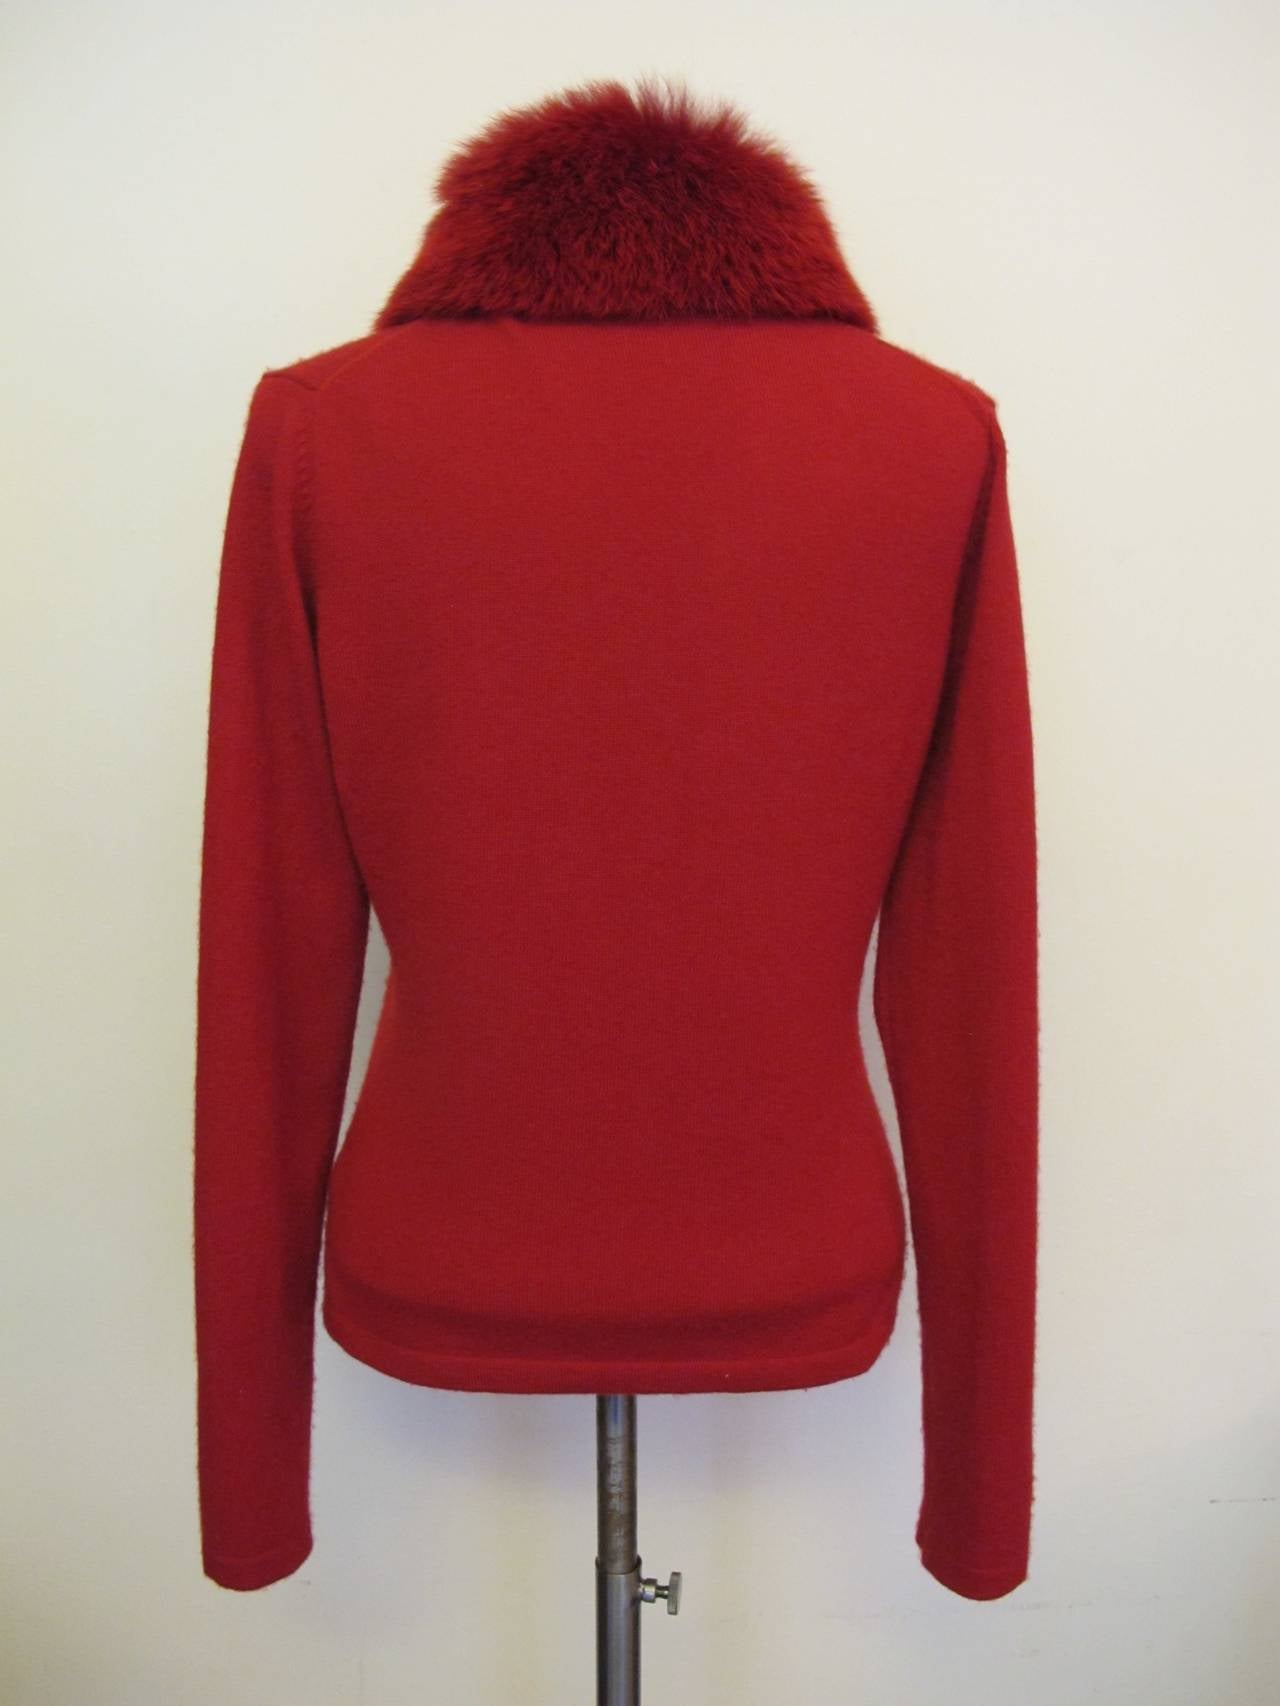 Women's Randolph Duke Scarlet Red Cashmere Cardigan Sweater with Fox Trim For Sale